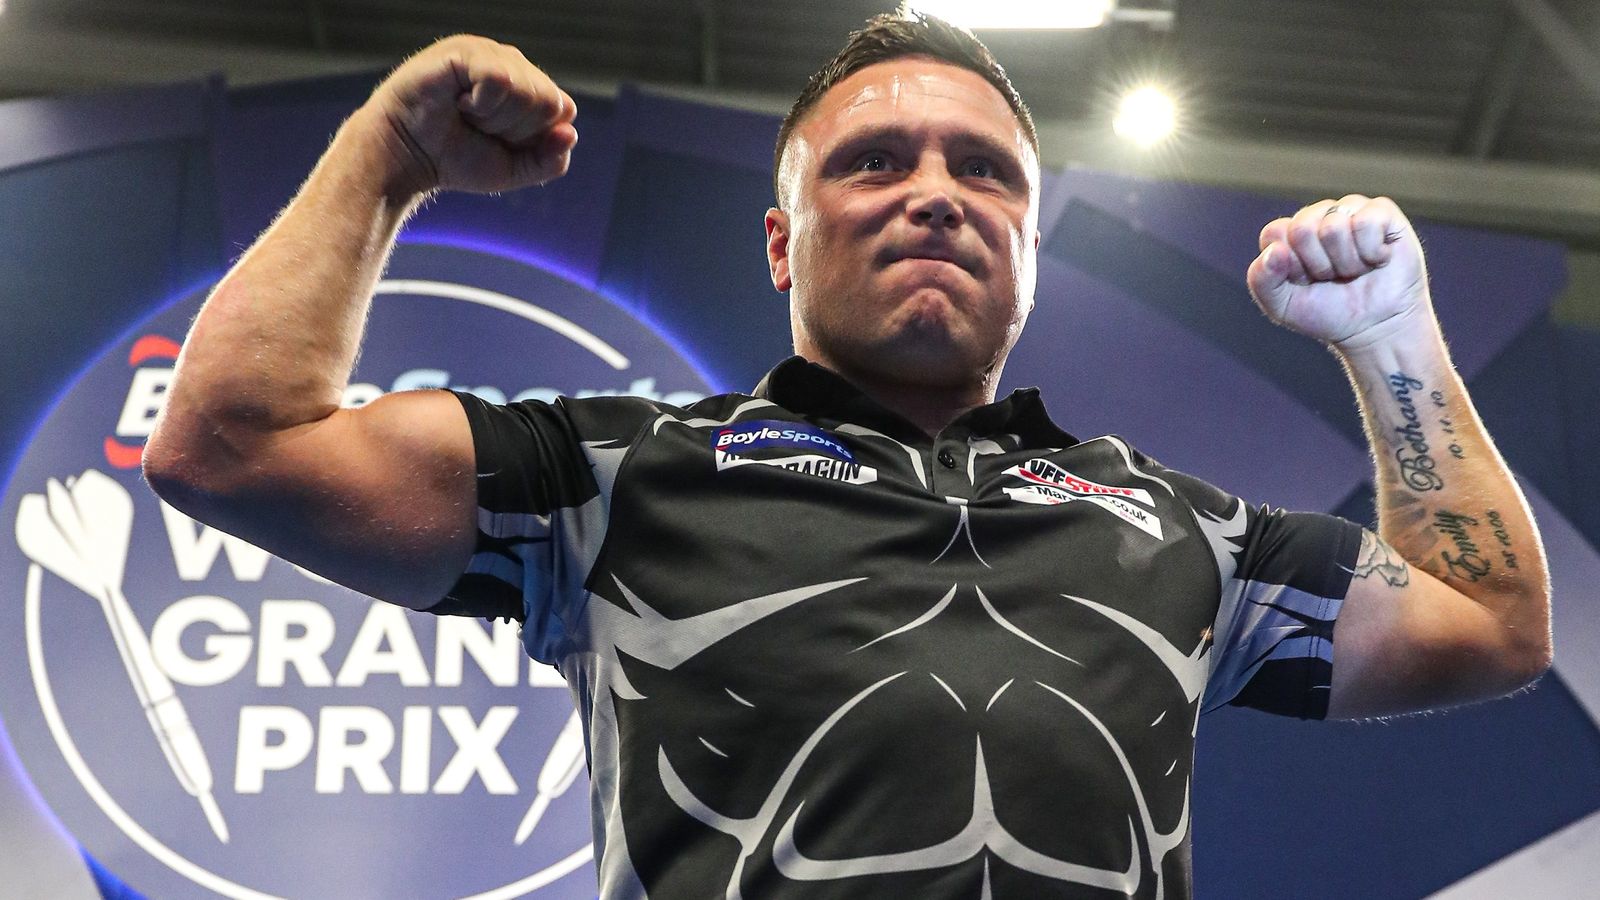 World Grand Prix: Gerwyn Price comes from behind to defeat Joe Cullen, while Nathan Aspinall also wins